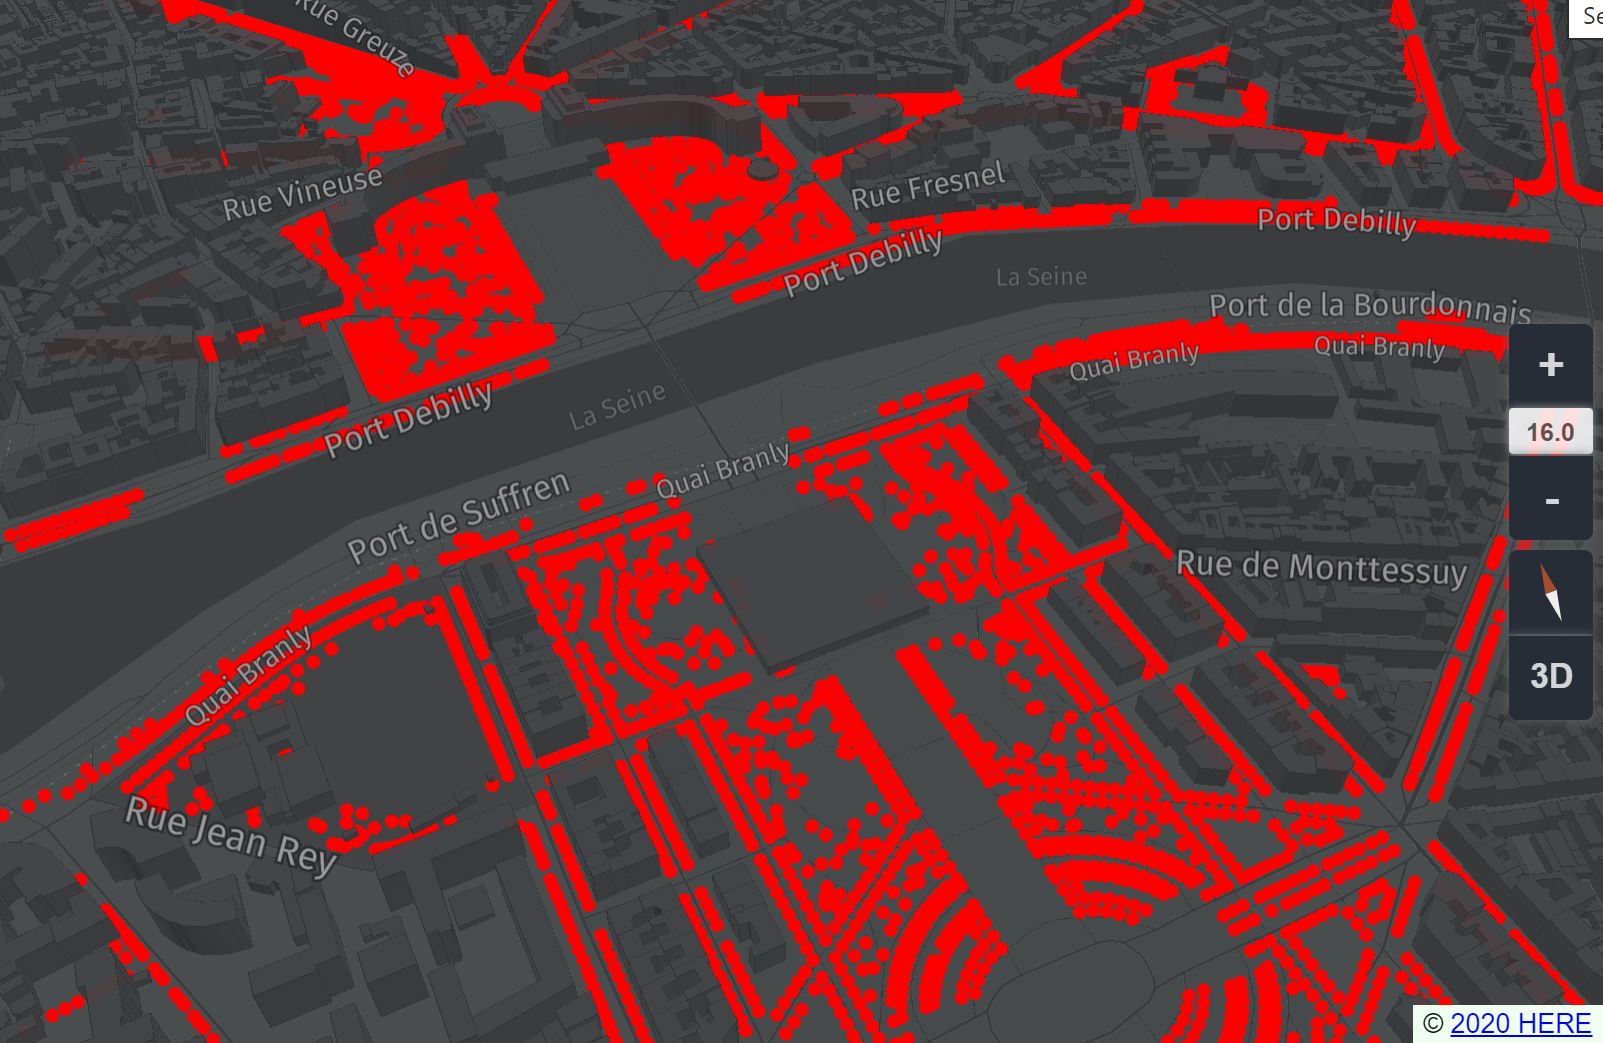 Trees of Paris visualised as points